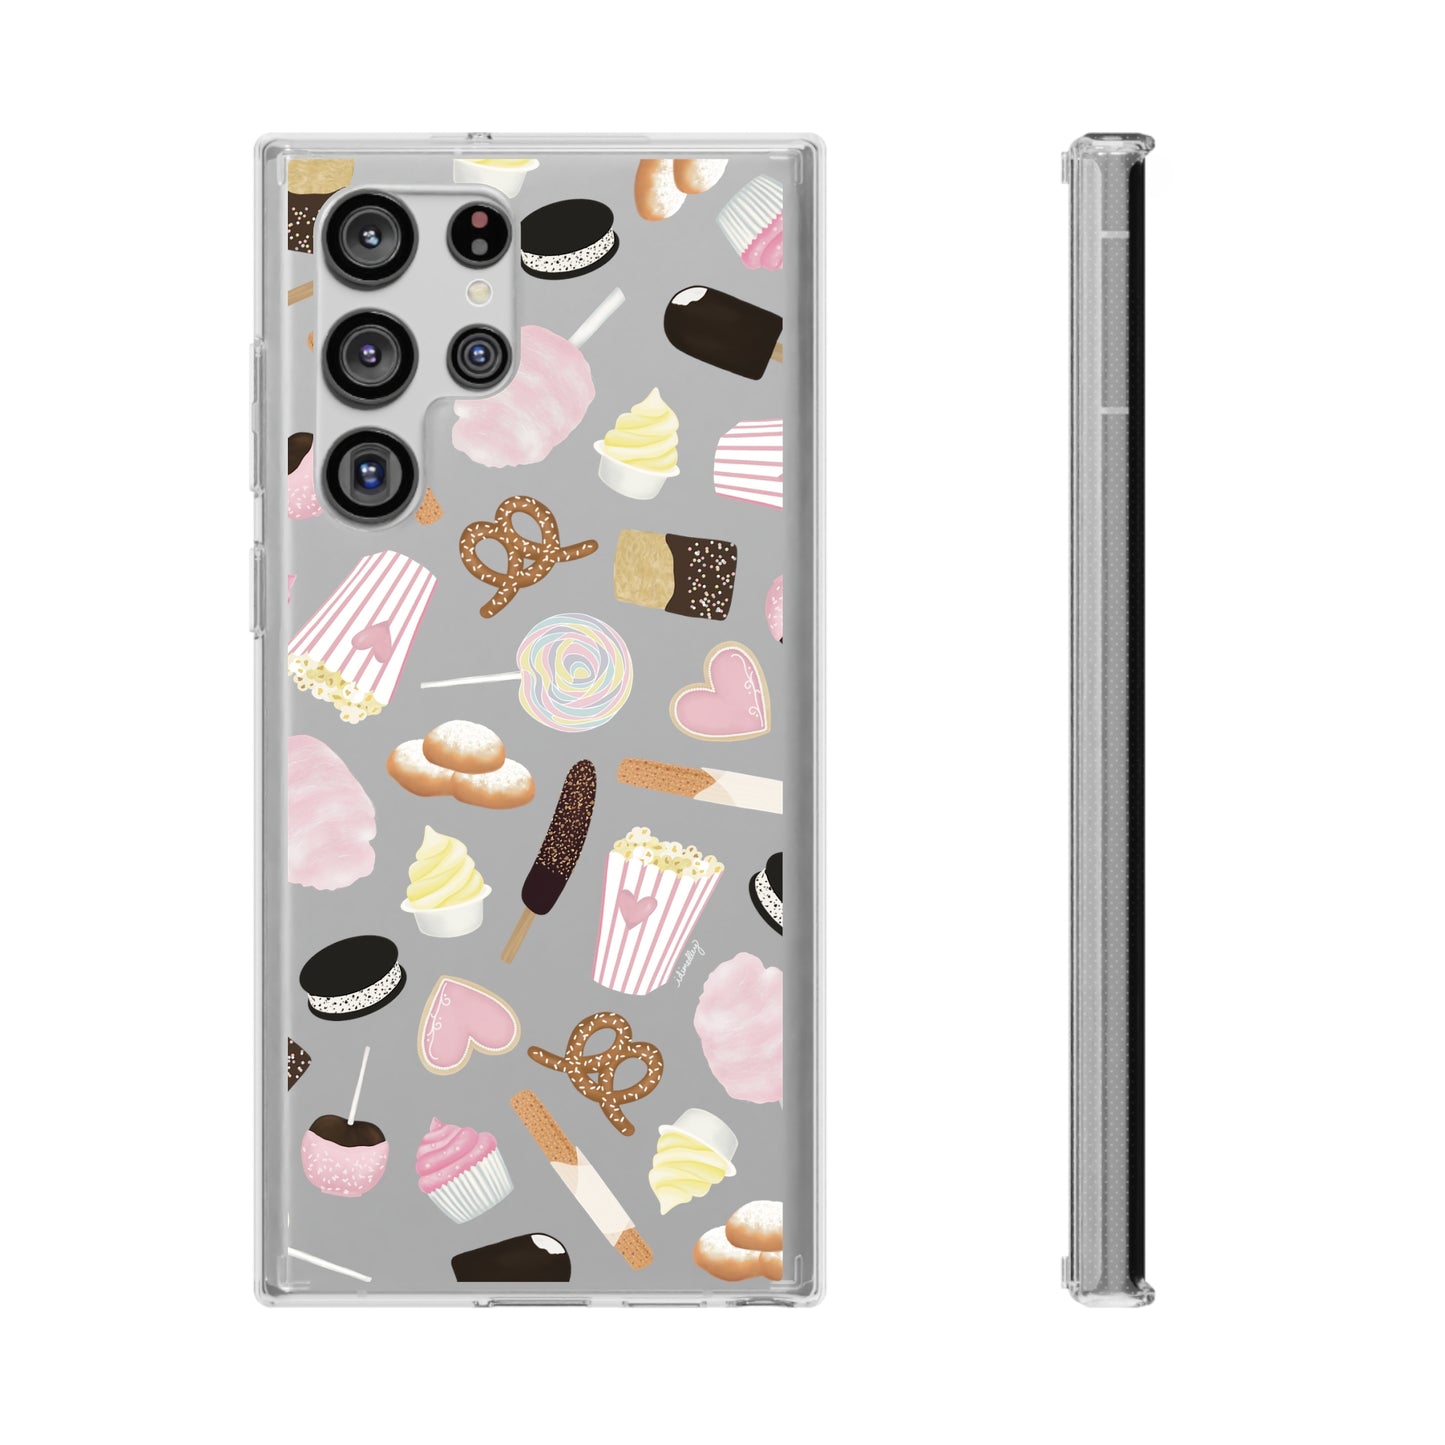 Happiest Snacks CLEAR Case